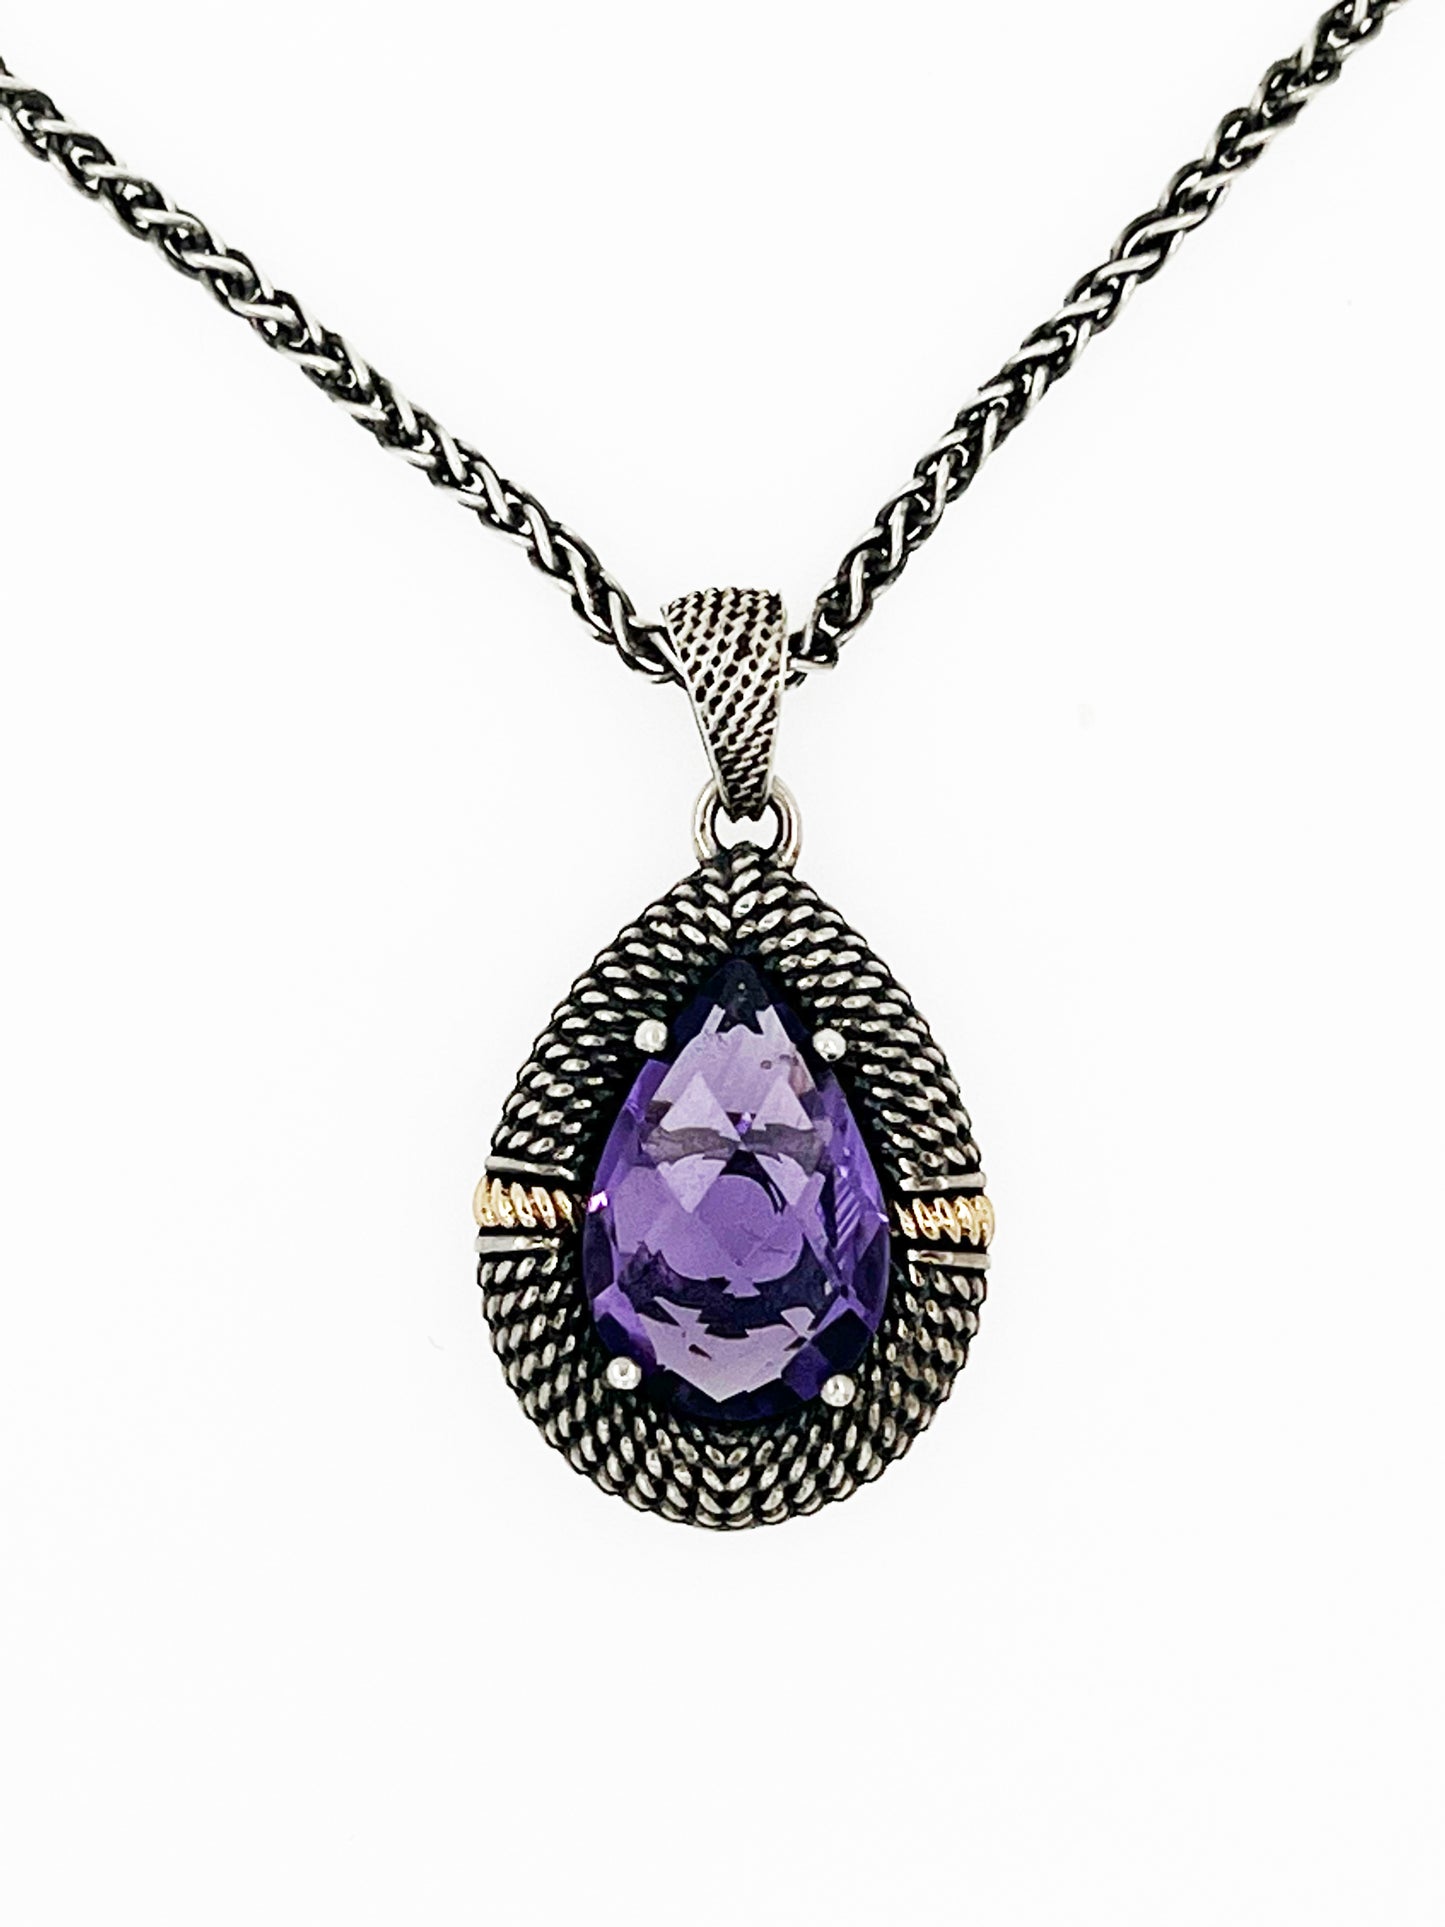 Fancy Pear Amethyst Pendant & Wheat Link Chain in .925 Silver and 14k Yellow Gold